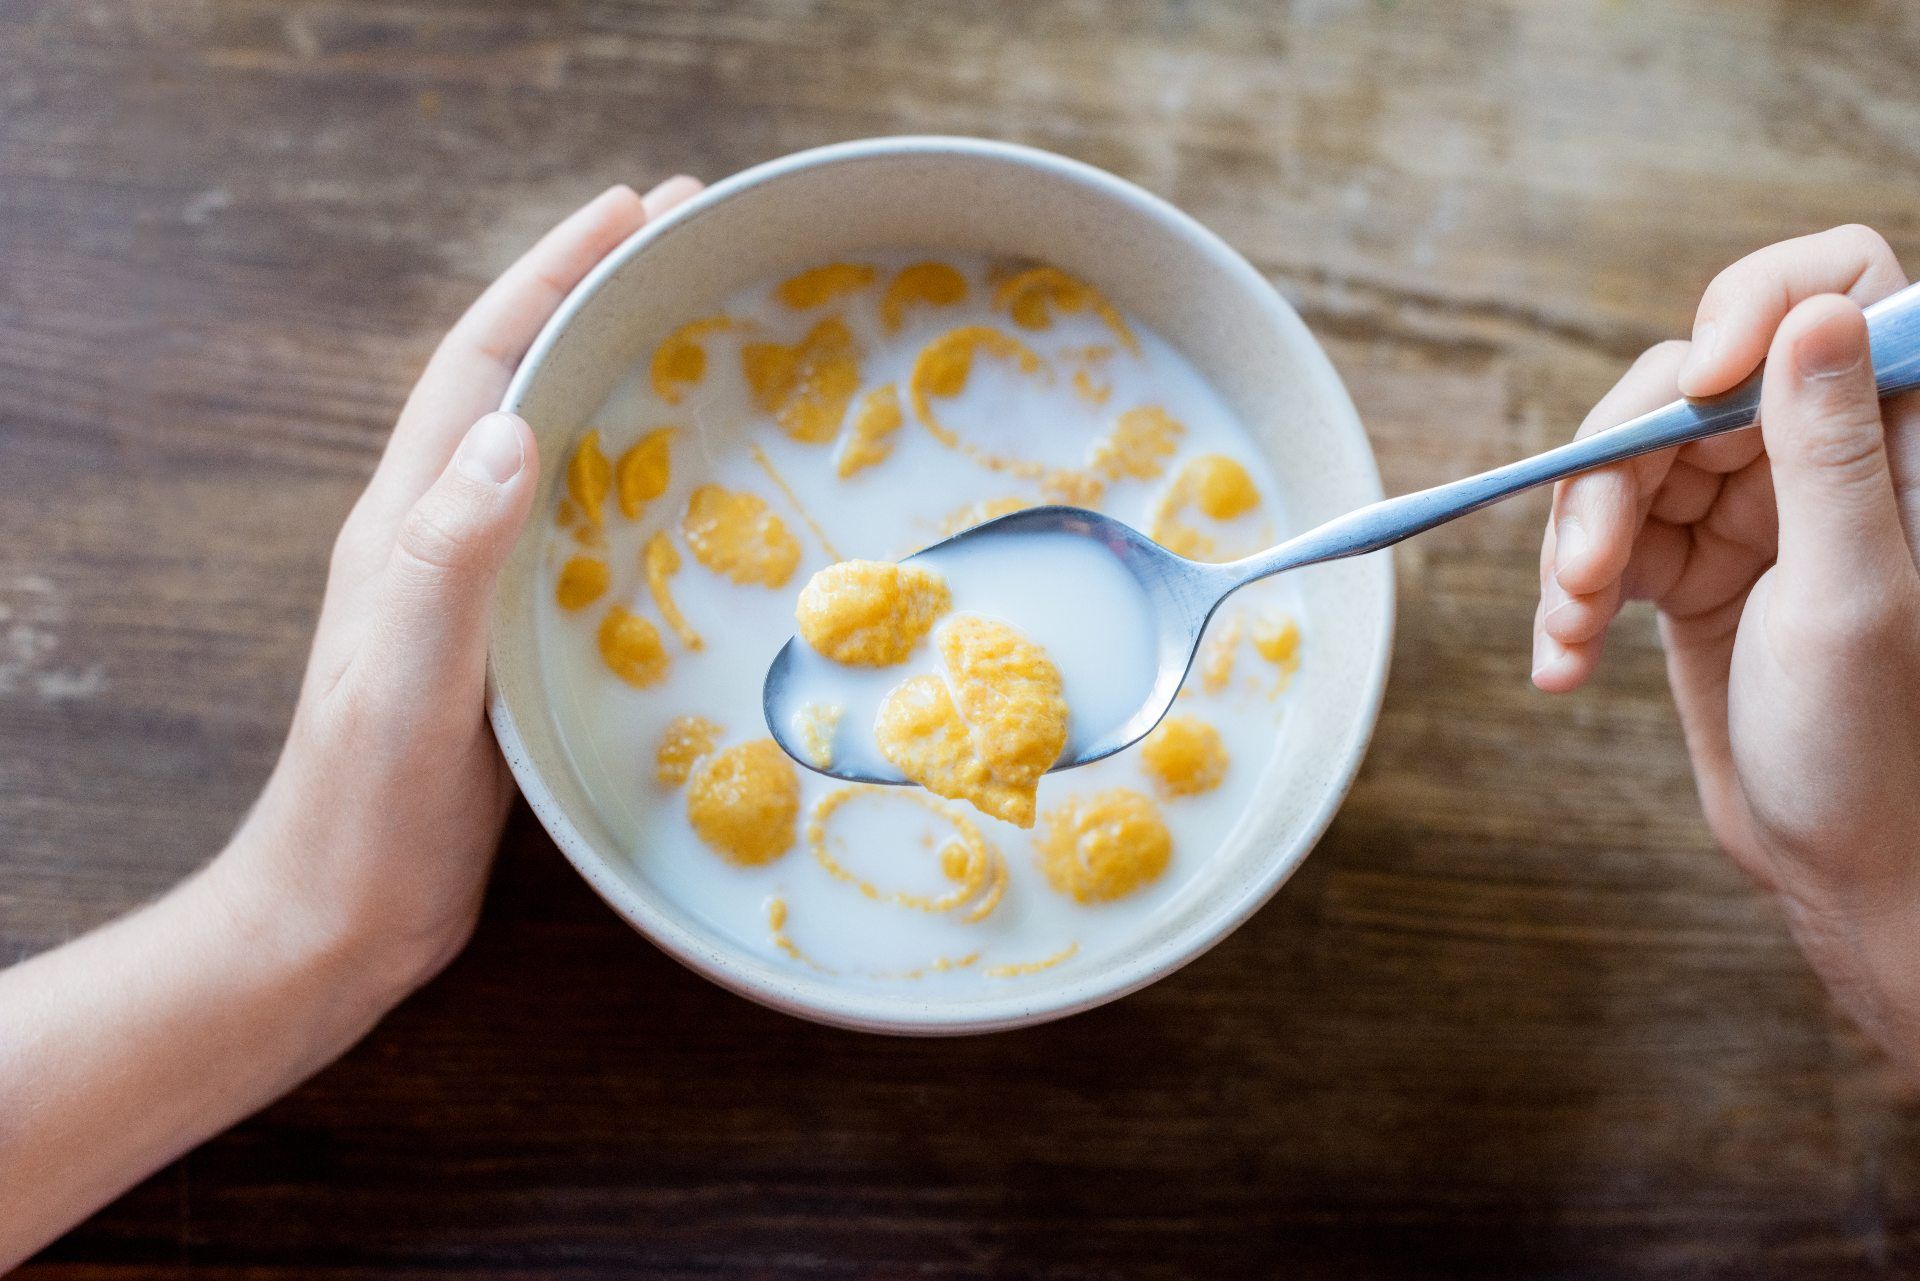 Overhead shot of a person's left hand on a bowl of cereal, with a spoon of cereal in their right hand. - kellogg's cereal